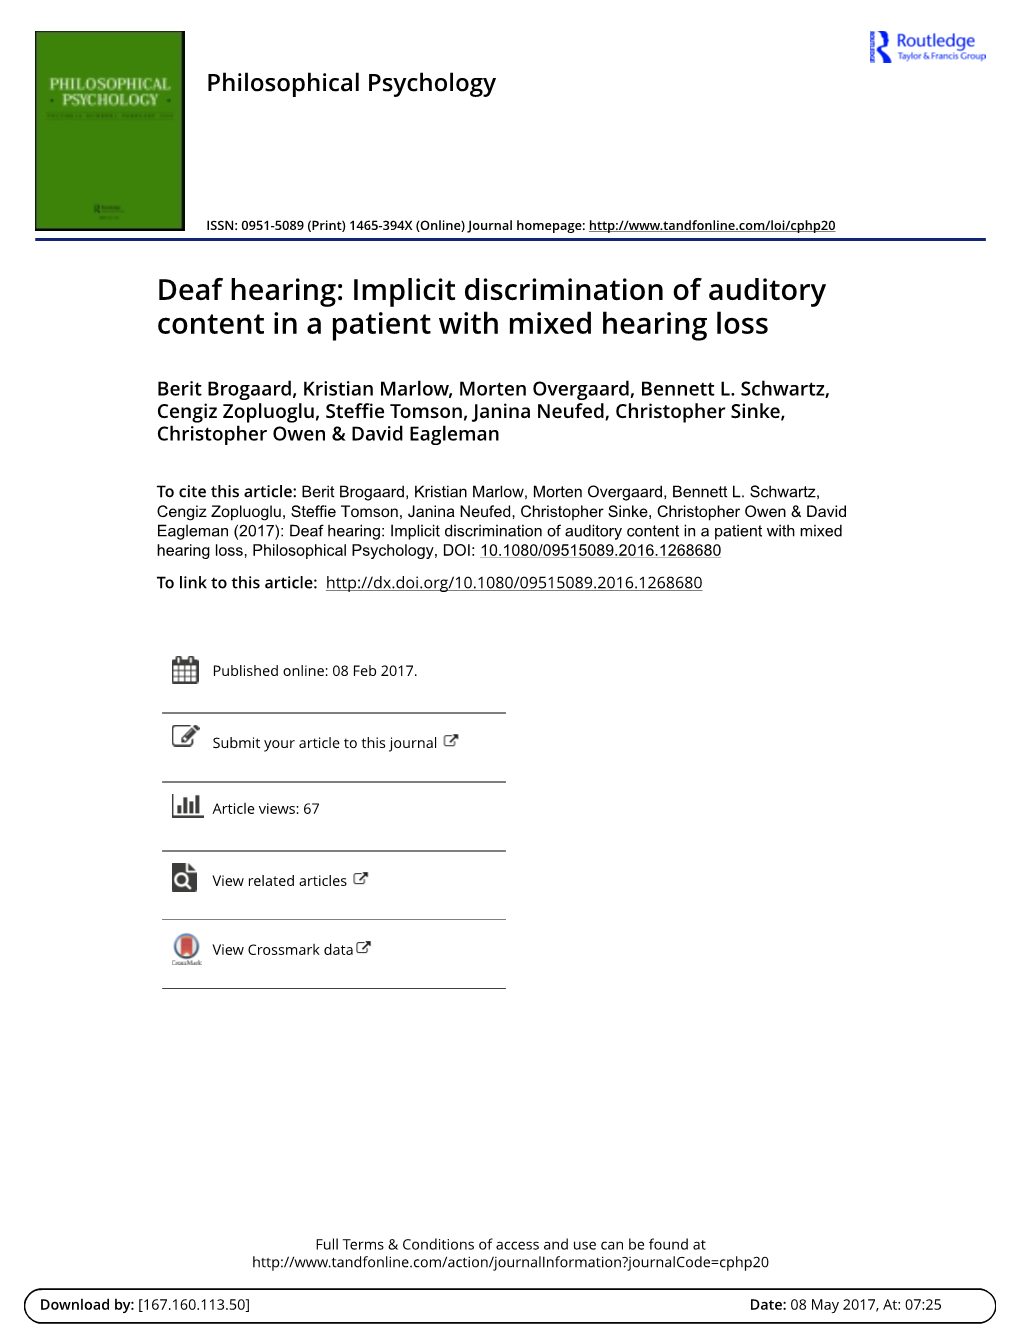 Deaf Hearing: Implicit Discrimination of Auditory Content in a Patient with Mixed Hearing Loss